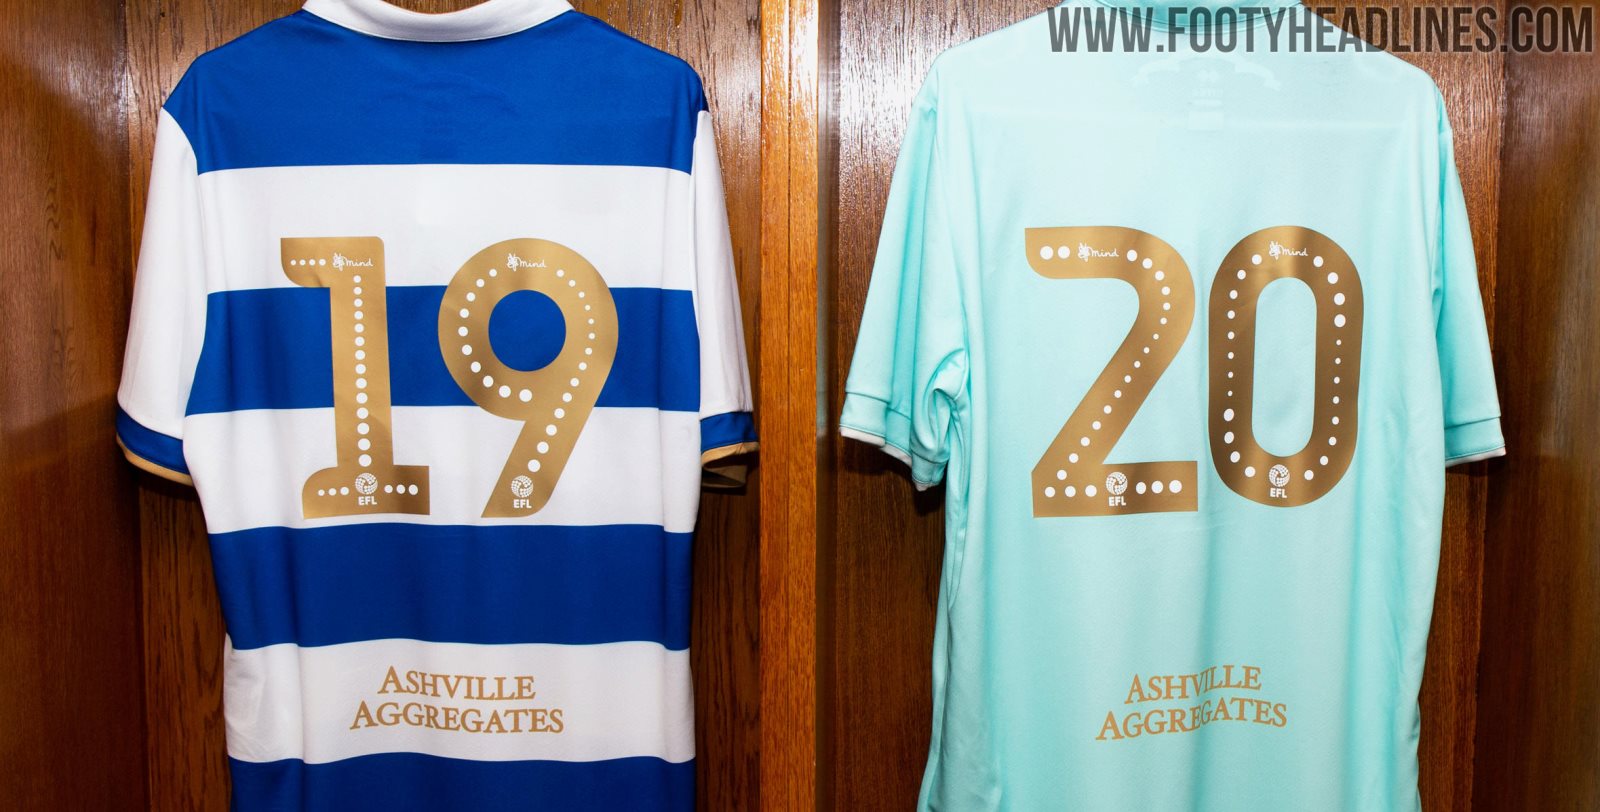 Nice home, hideous away' - Mixed reviews as QPR unveil new kits for 2018/19  and one is pink 